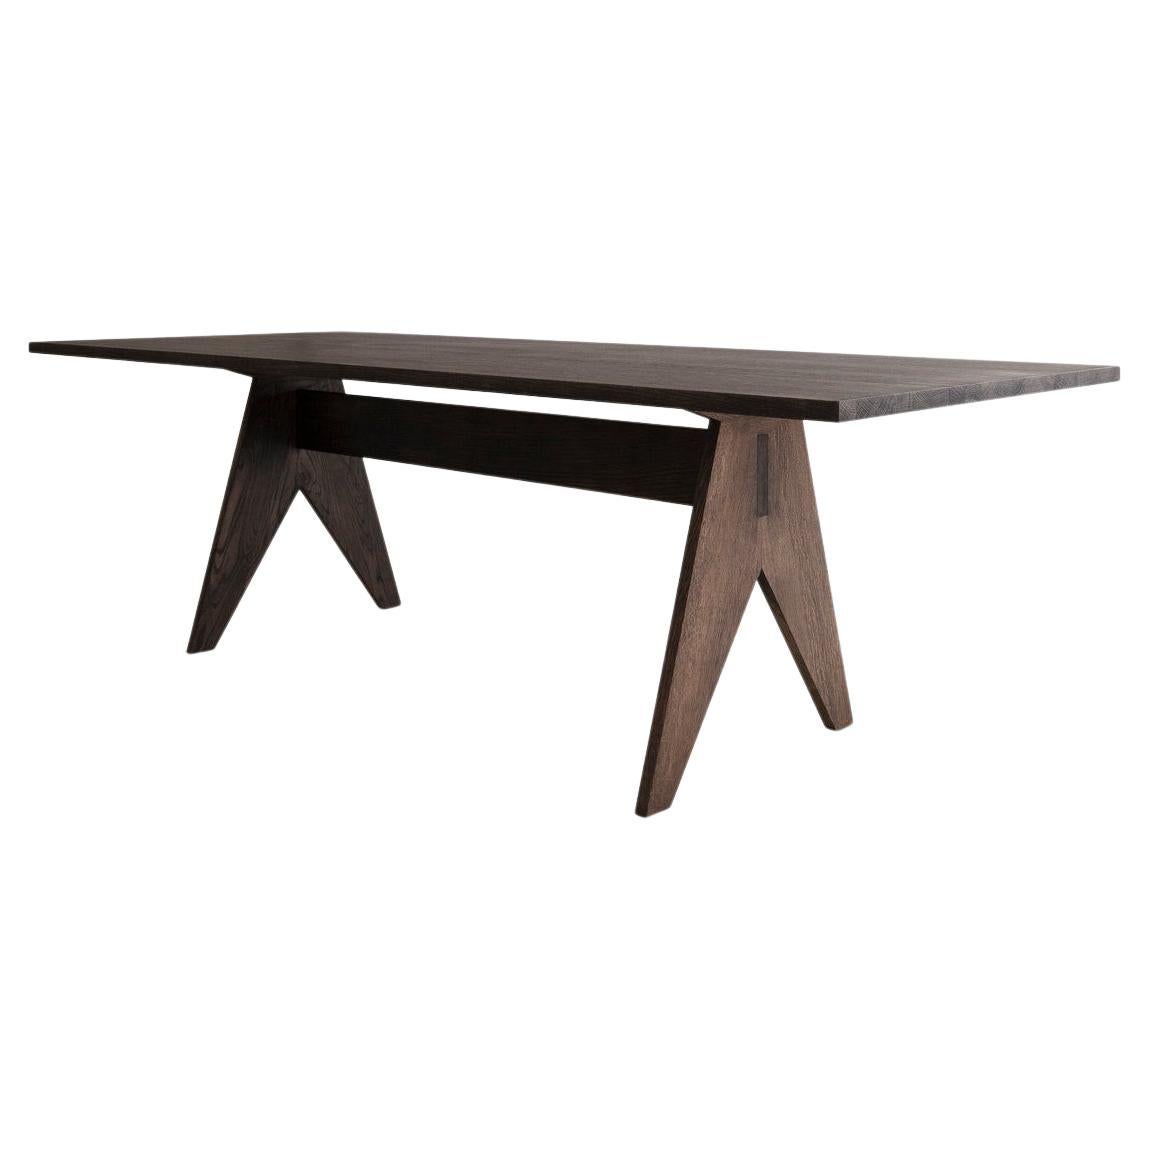 Contemporary Dining Room Table 'POSE', 250, Smoked oak + More Sizes For Sale